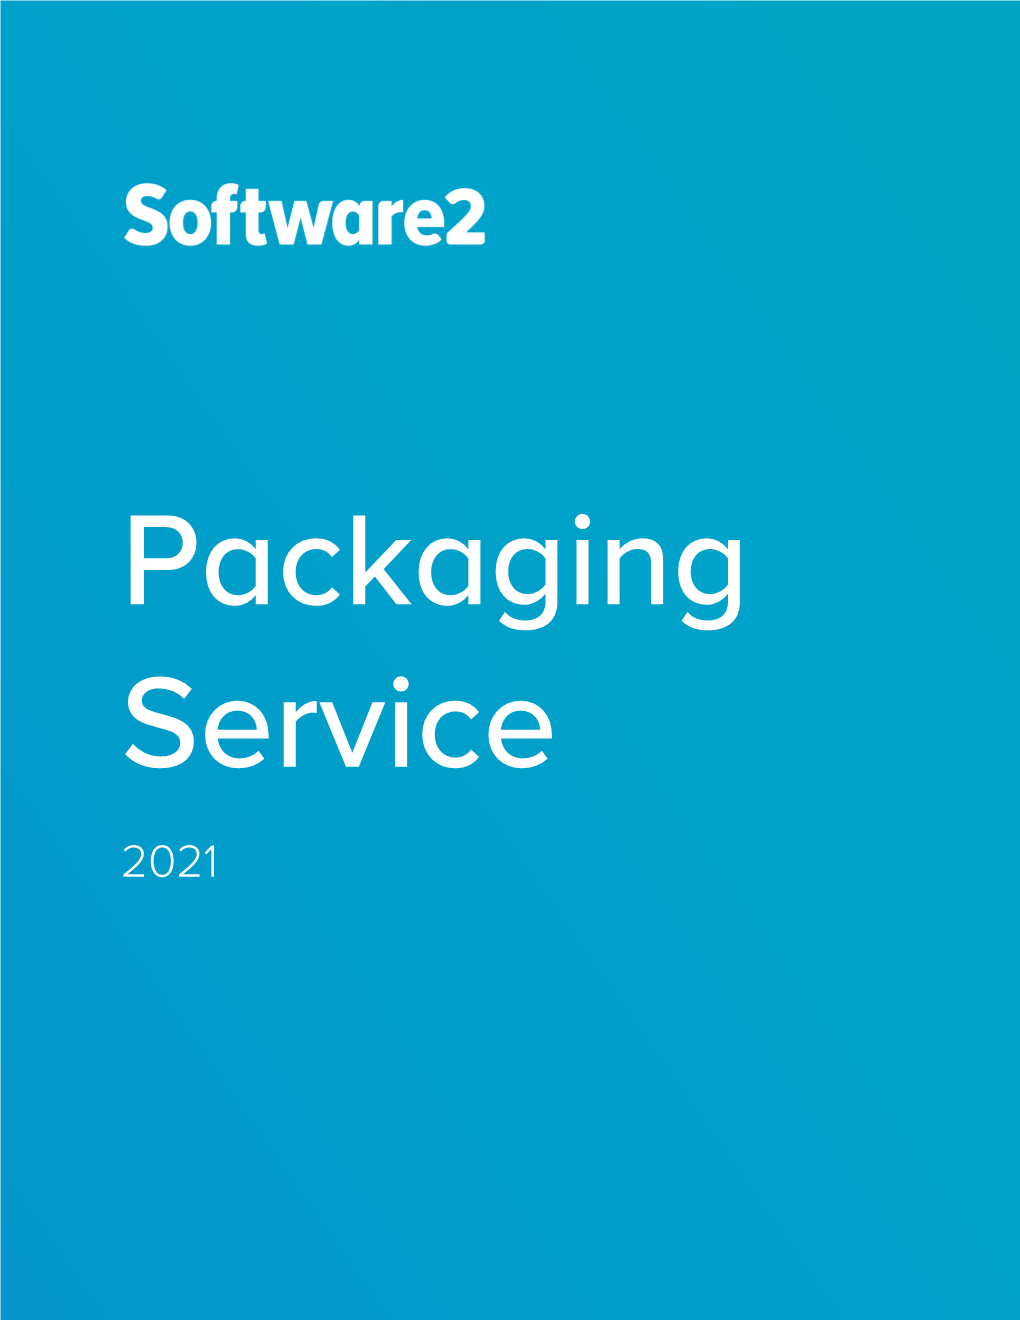 Packaging Service 2021